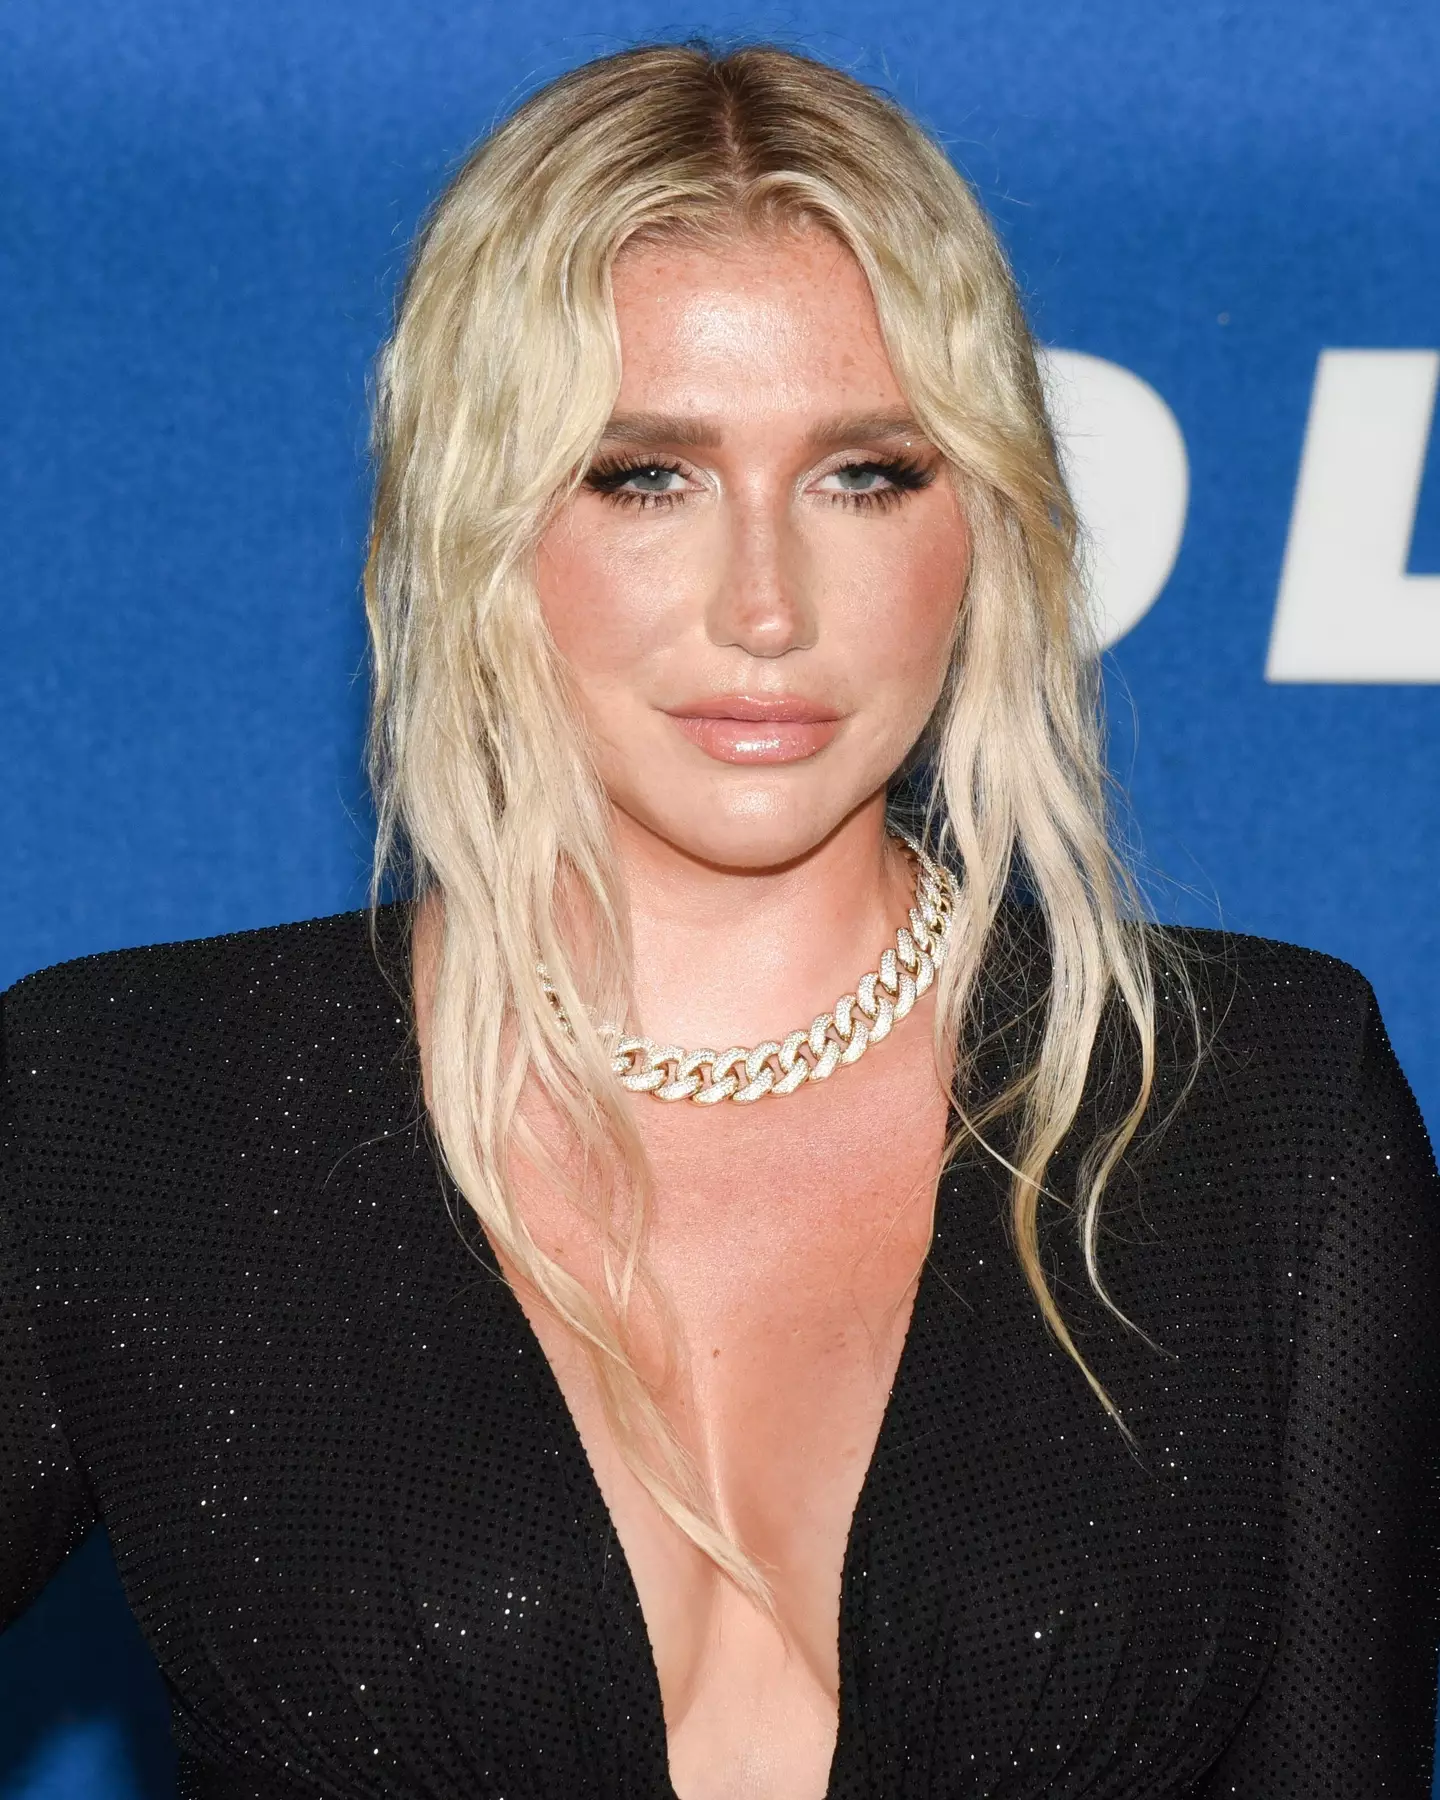 Kesha has opened up about her health.